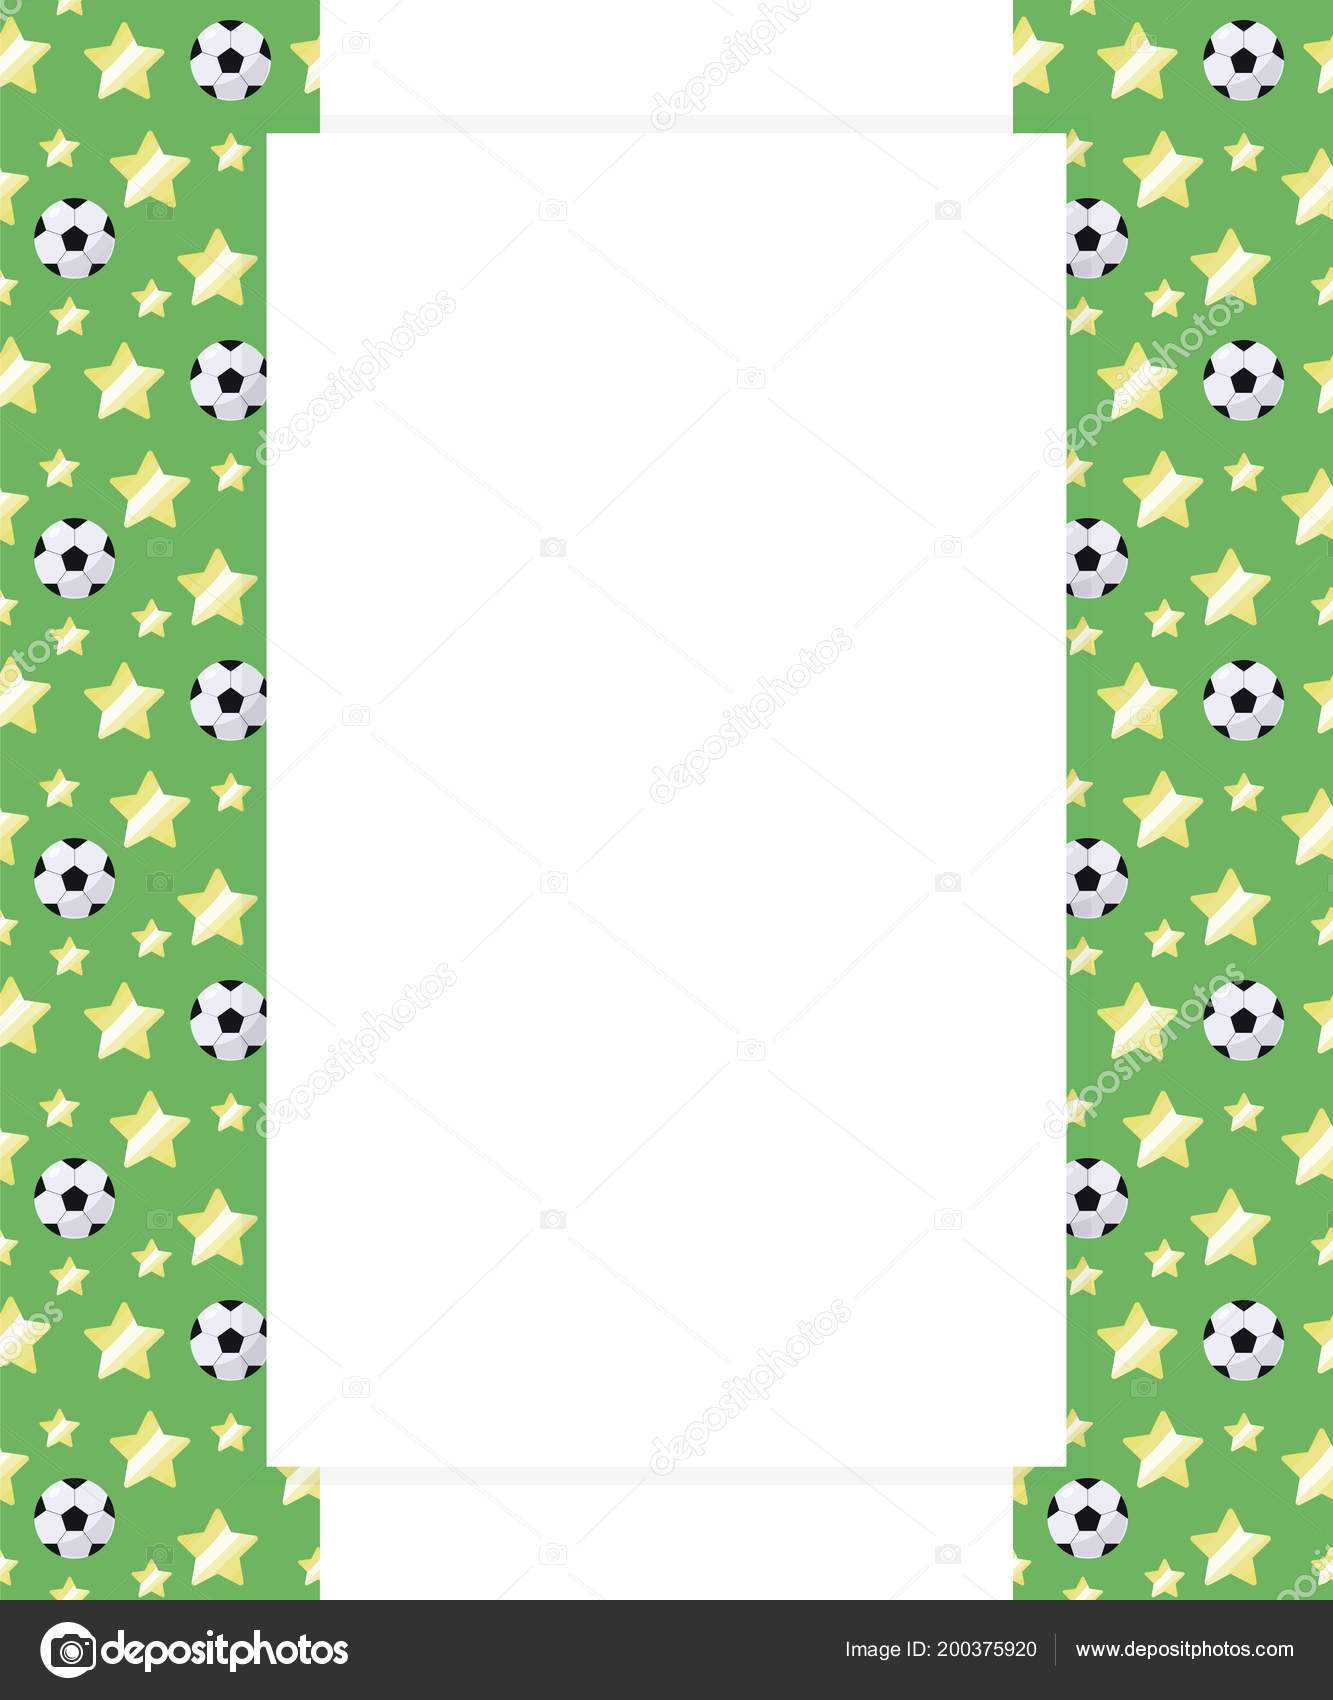 Blank Soccer Field Template | Football Children Sports Throughout Blank Letter Writing Template For Kids